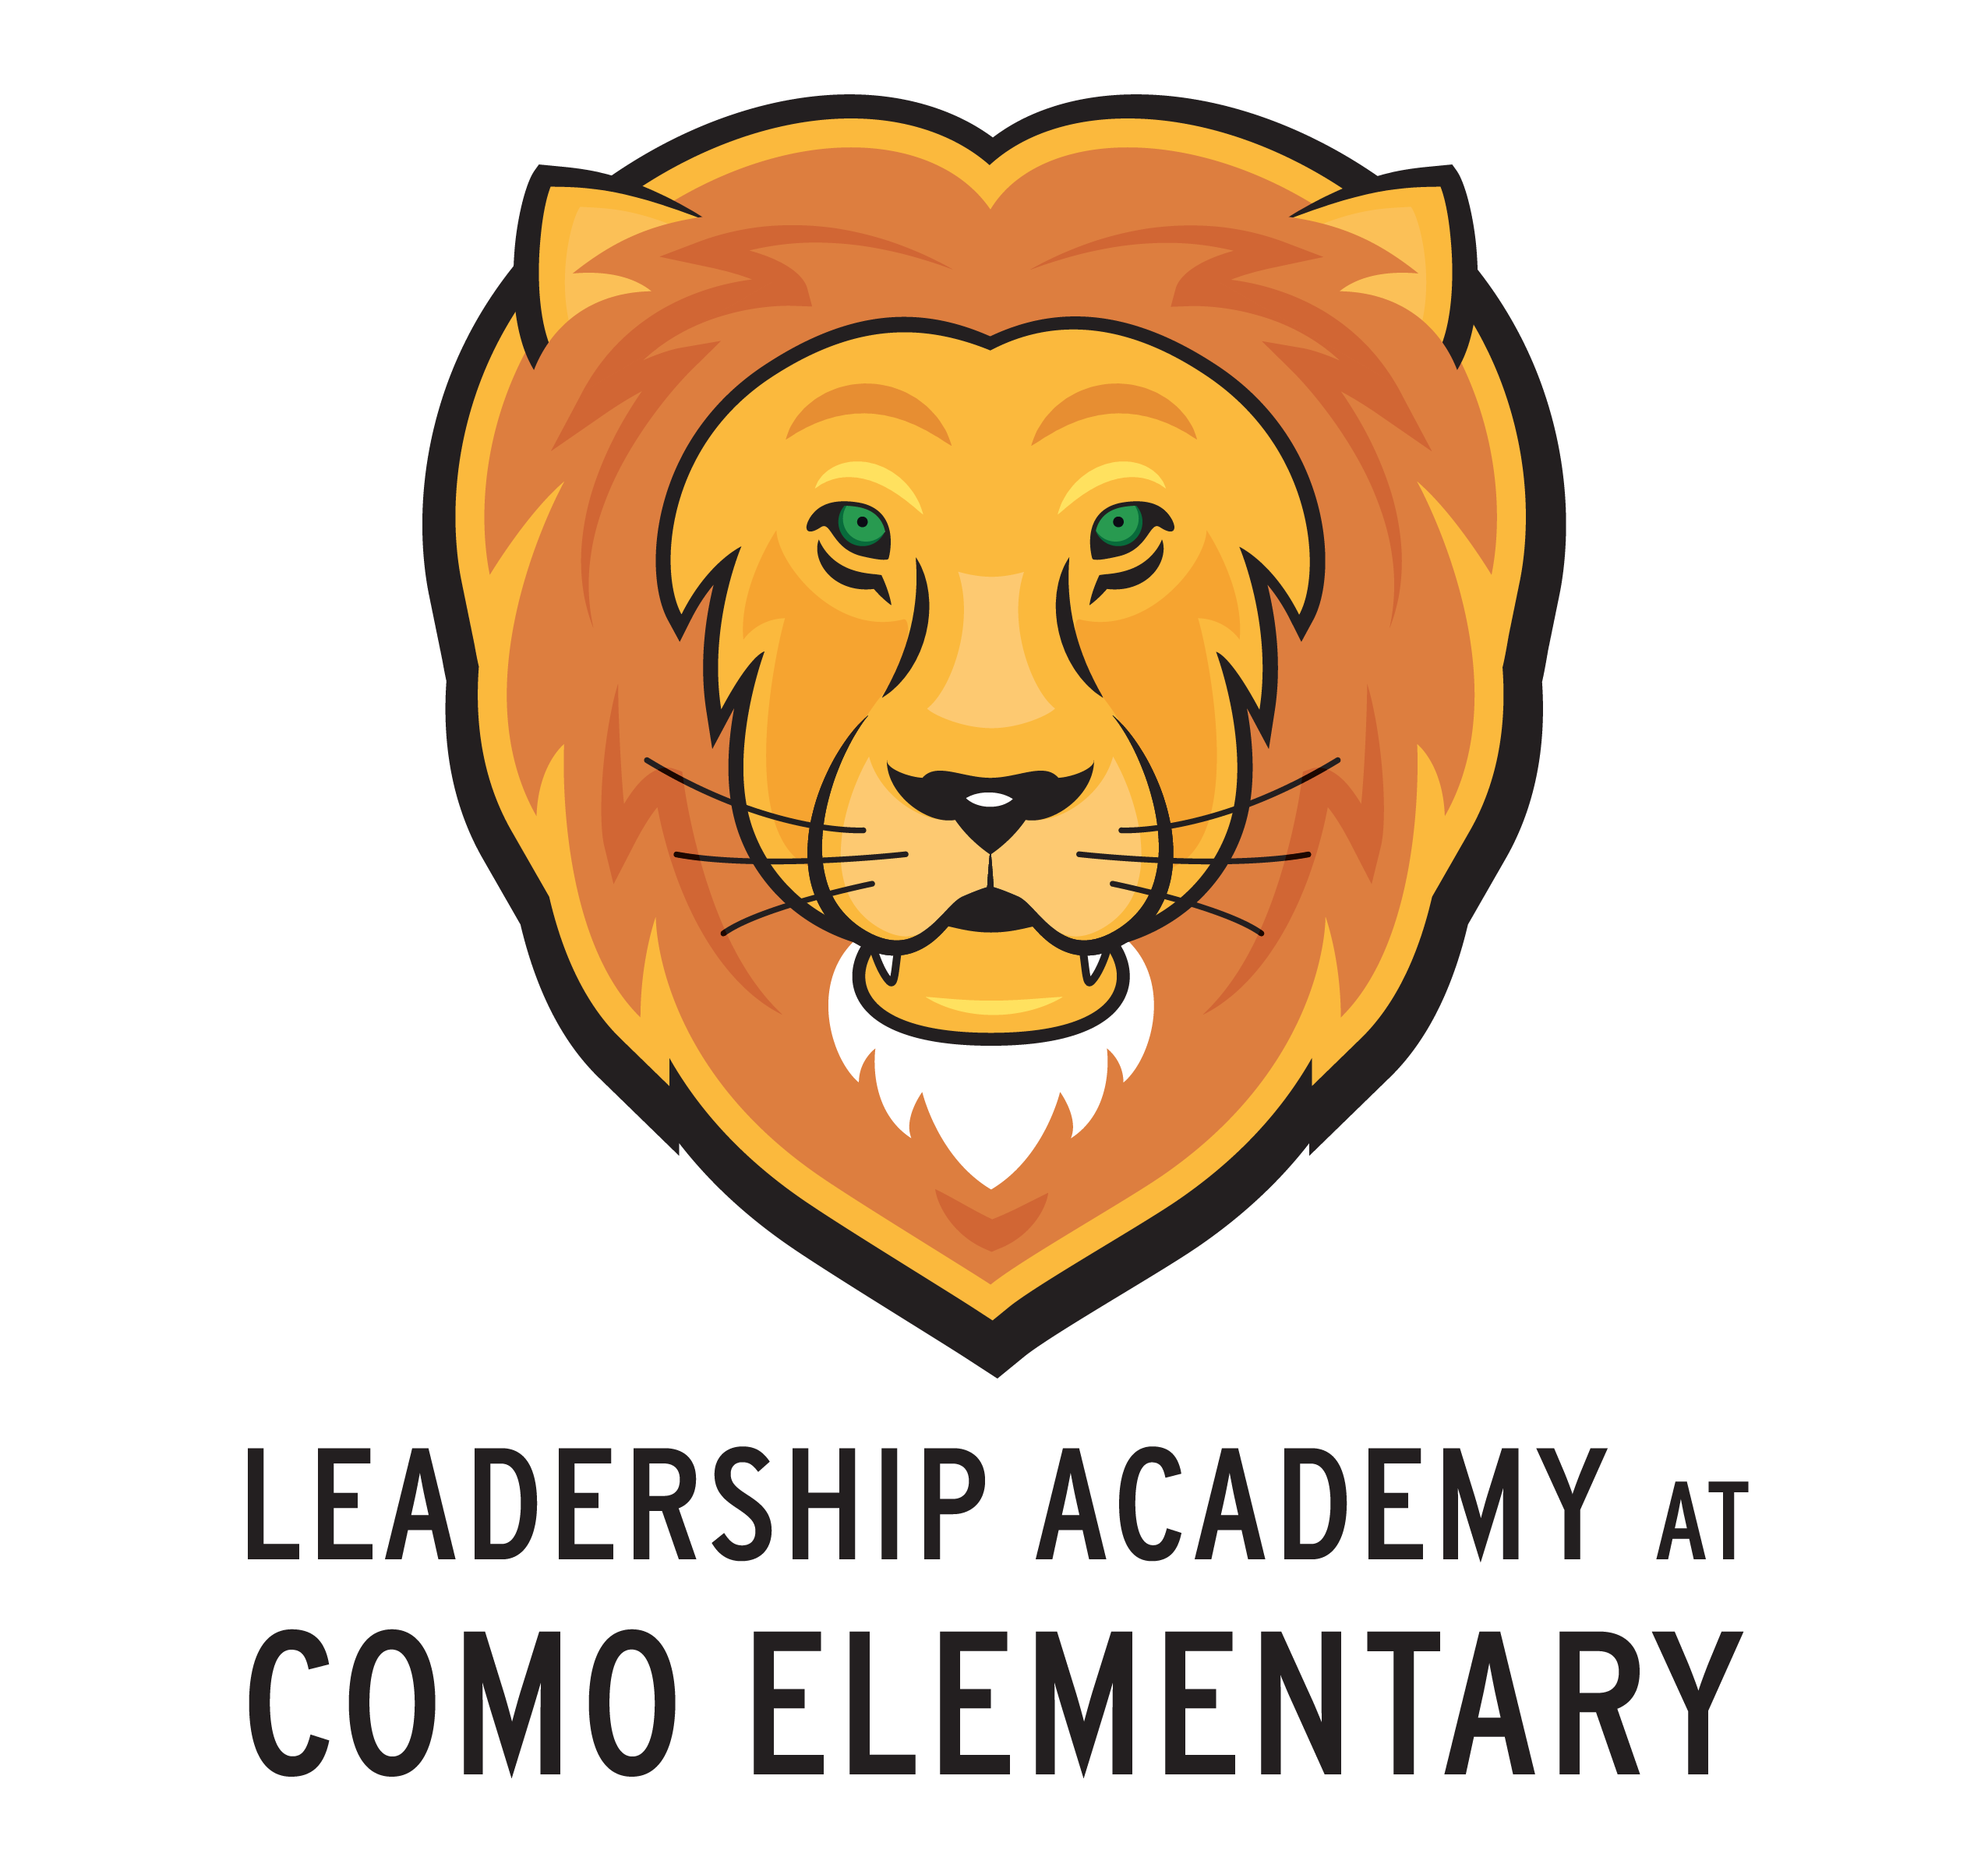 Image of the lion logo of the LAN at Como Elementary